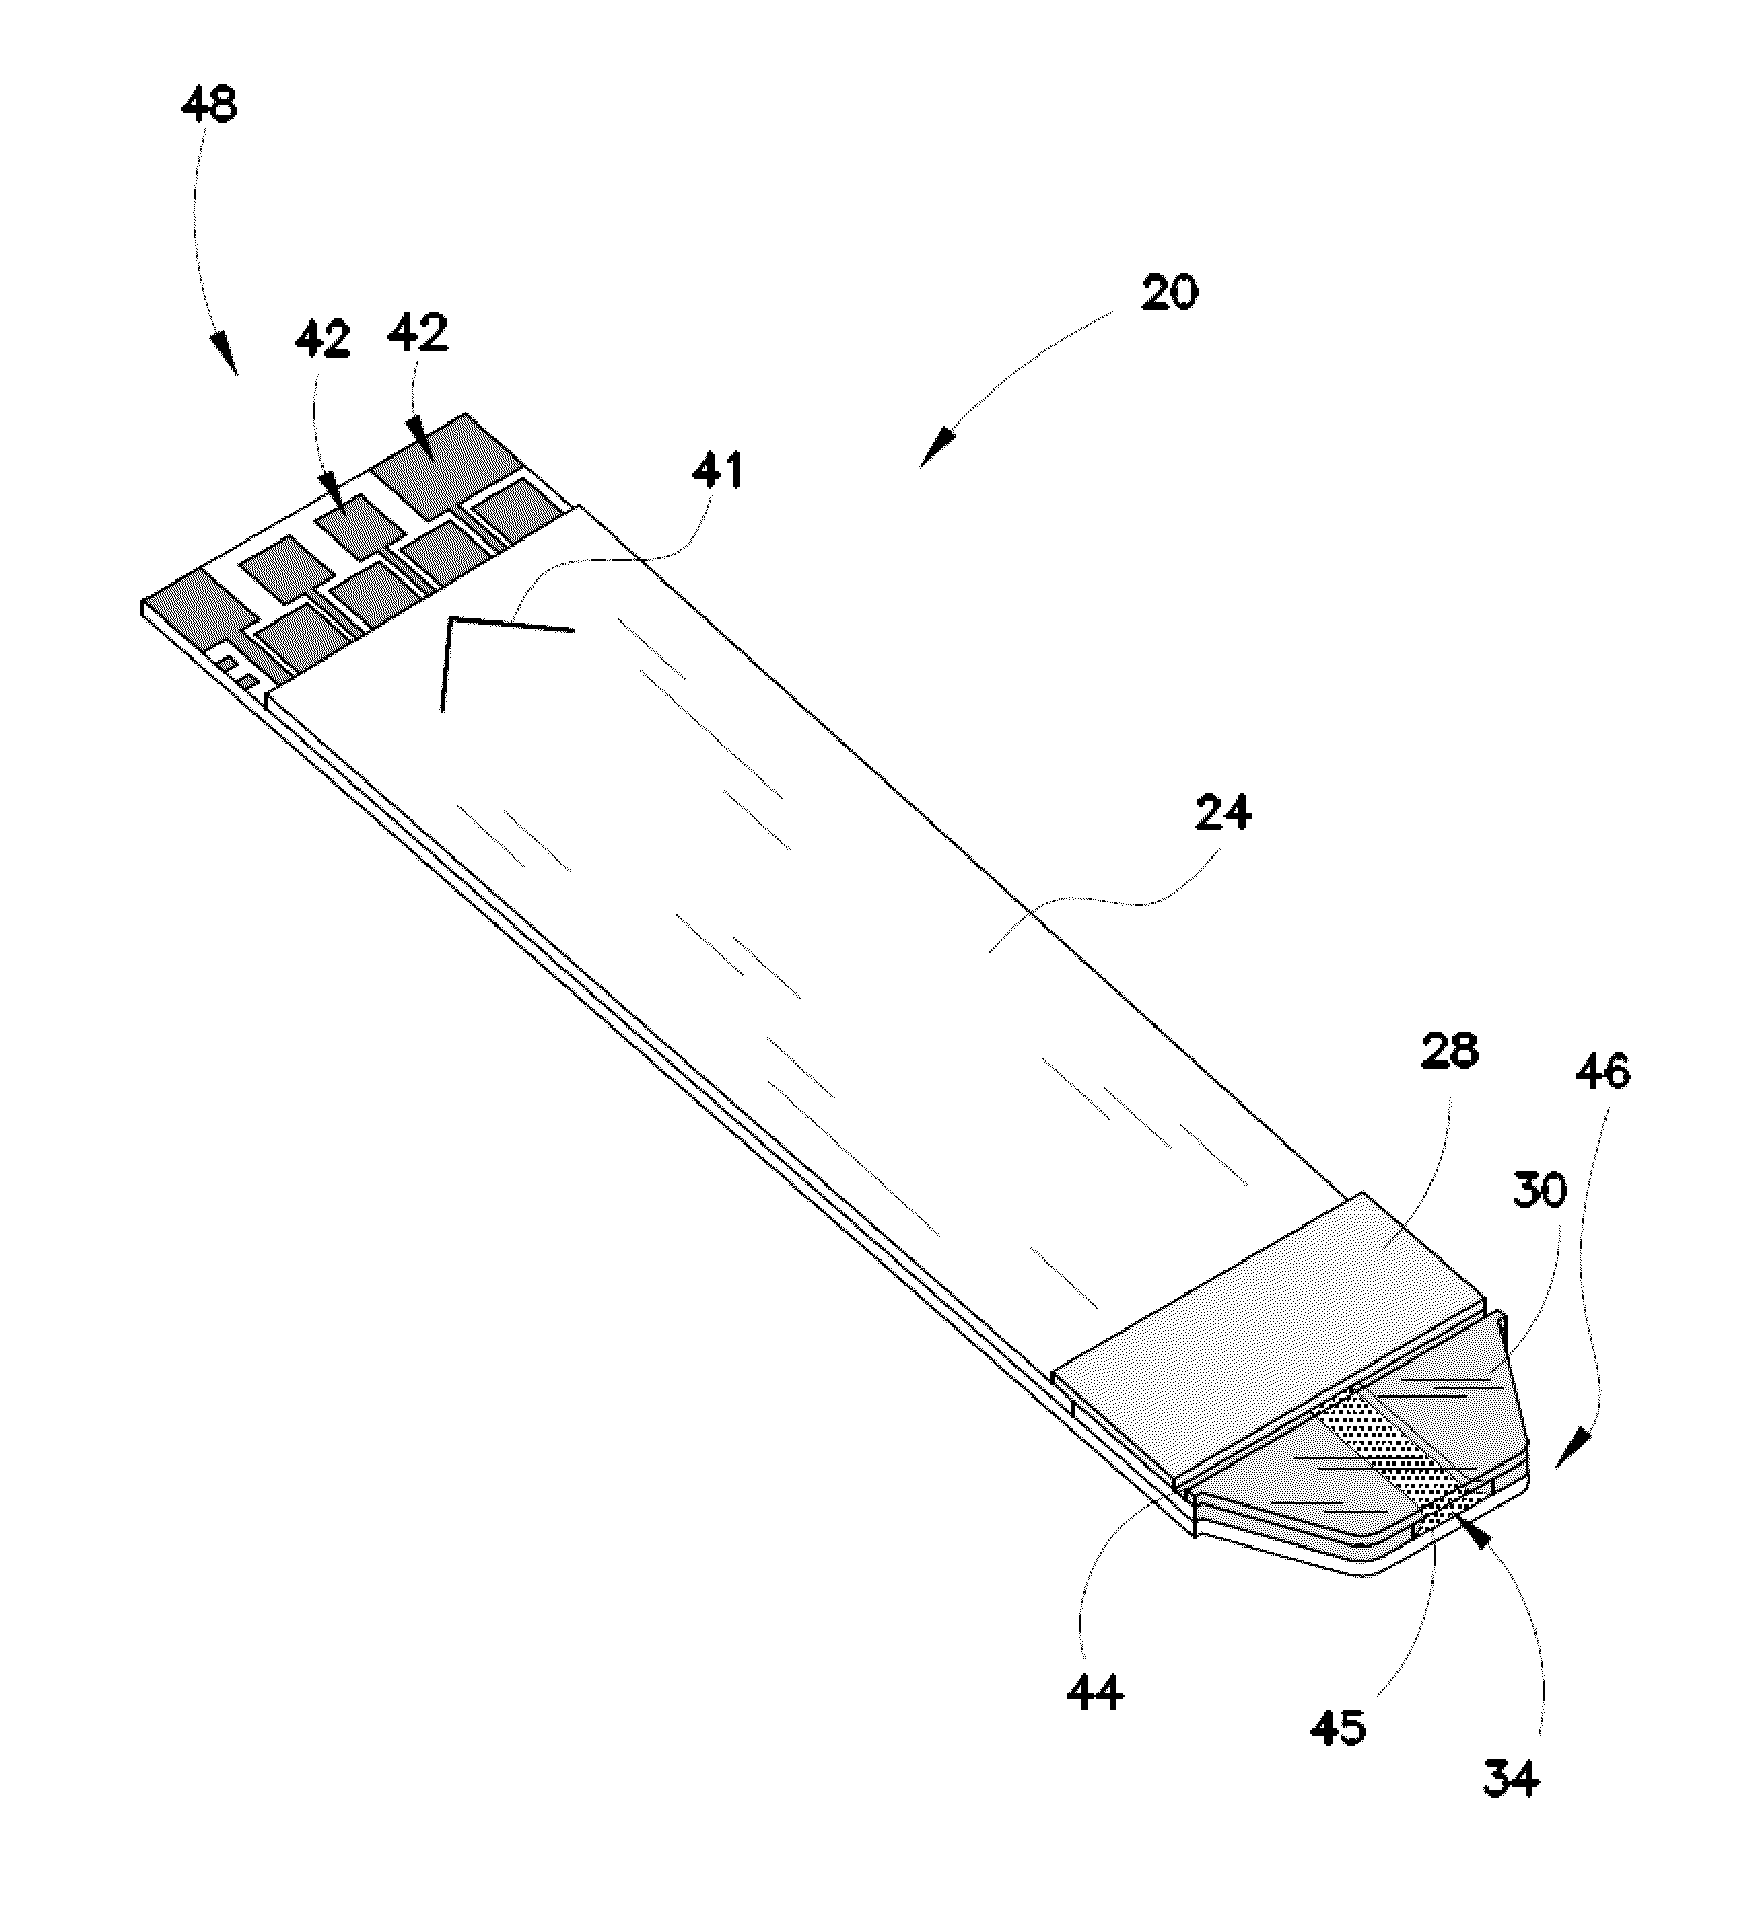 Electrical patterns for biosensor and method of making